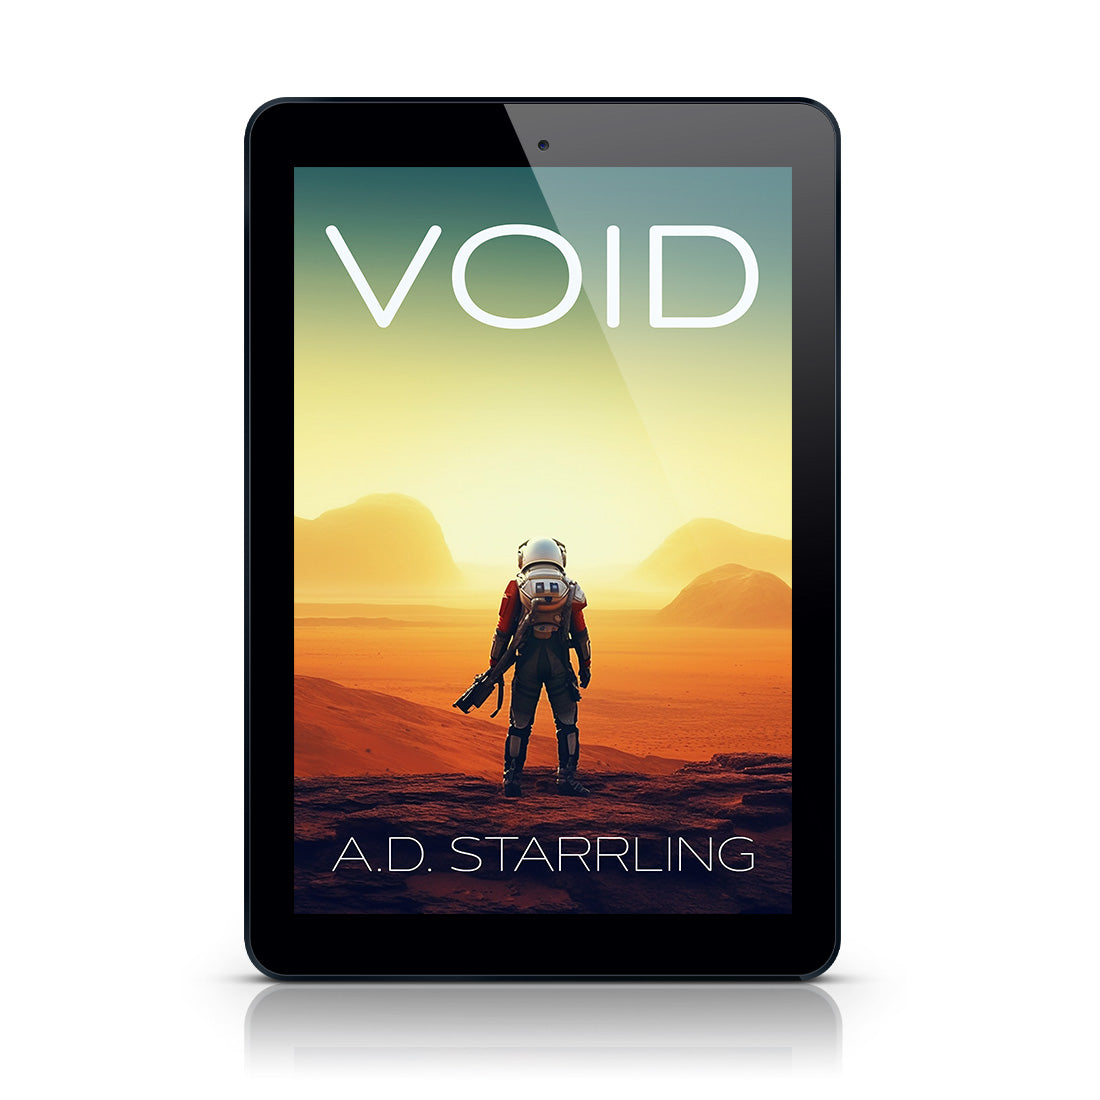 Void EBOOK sci-fi horror short story author ad starrling